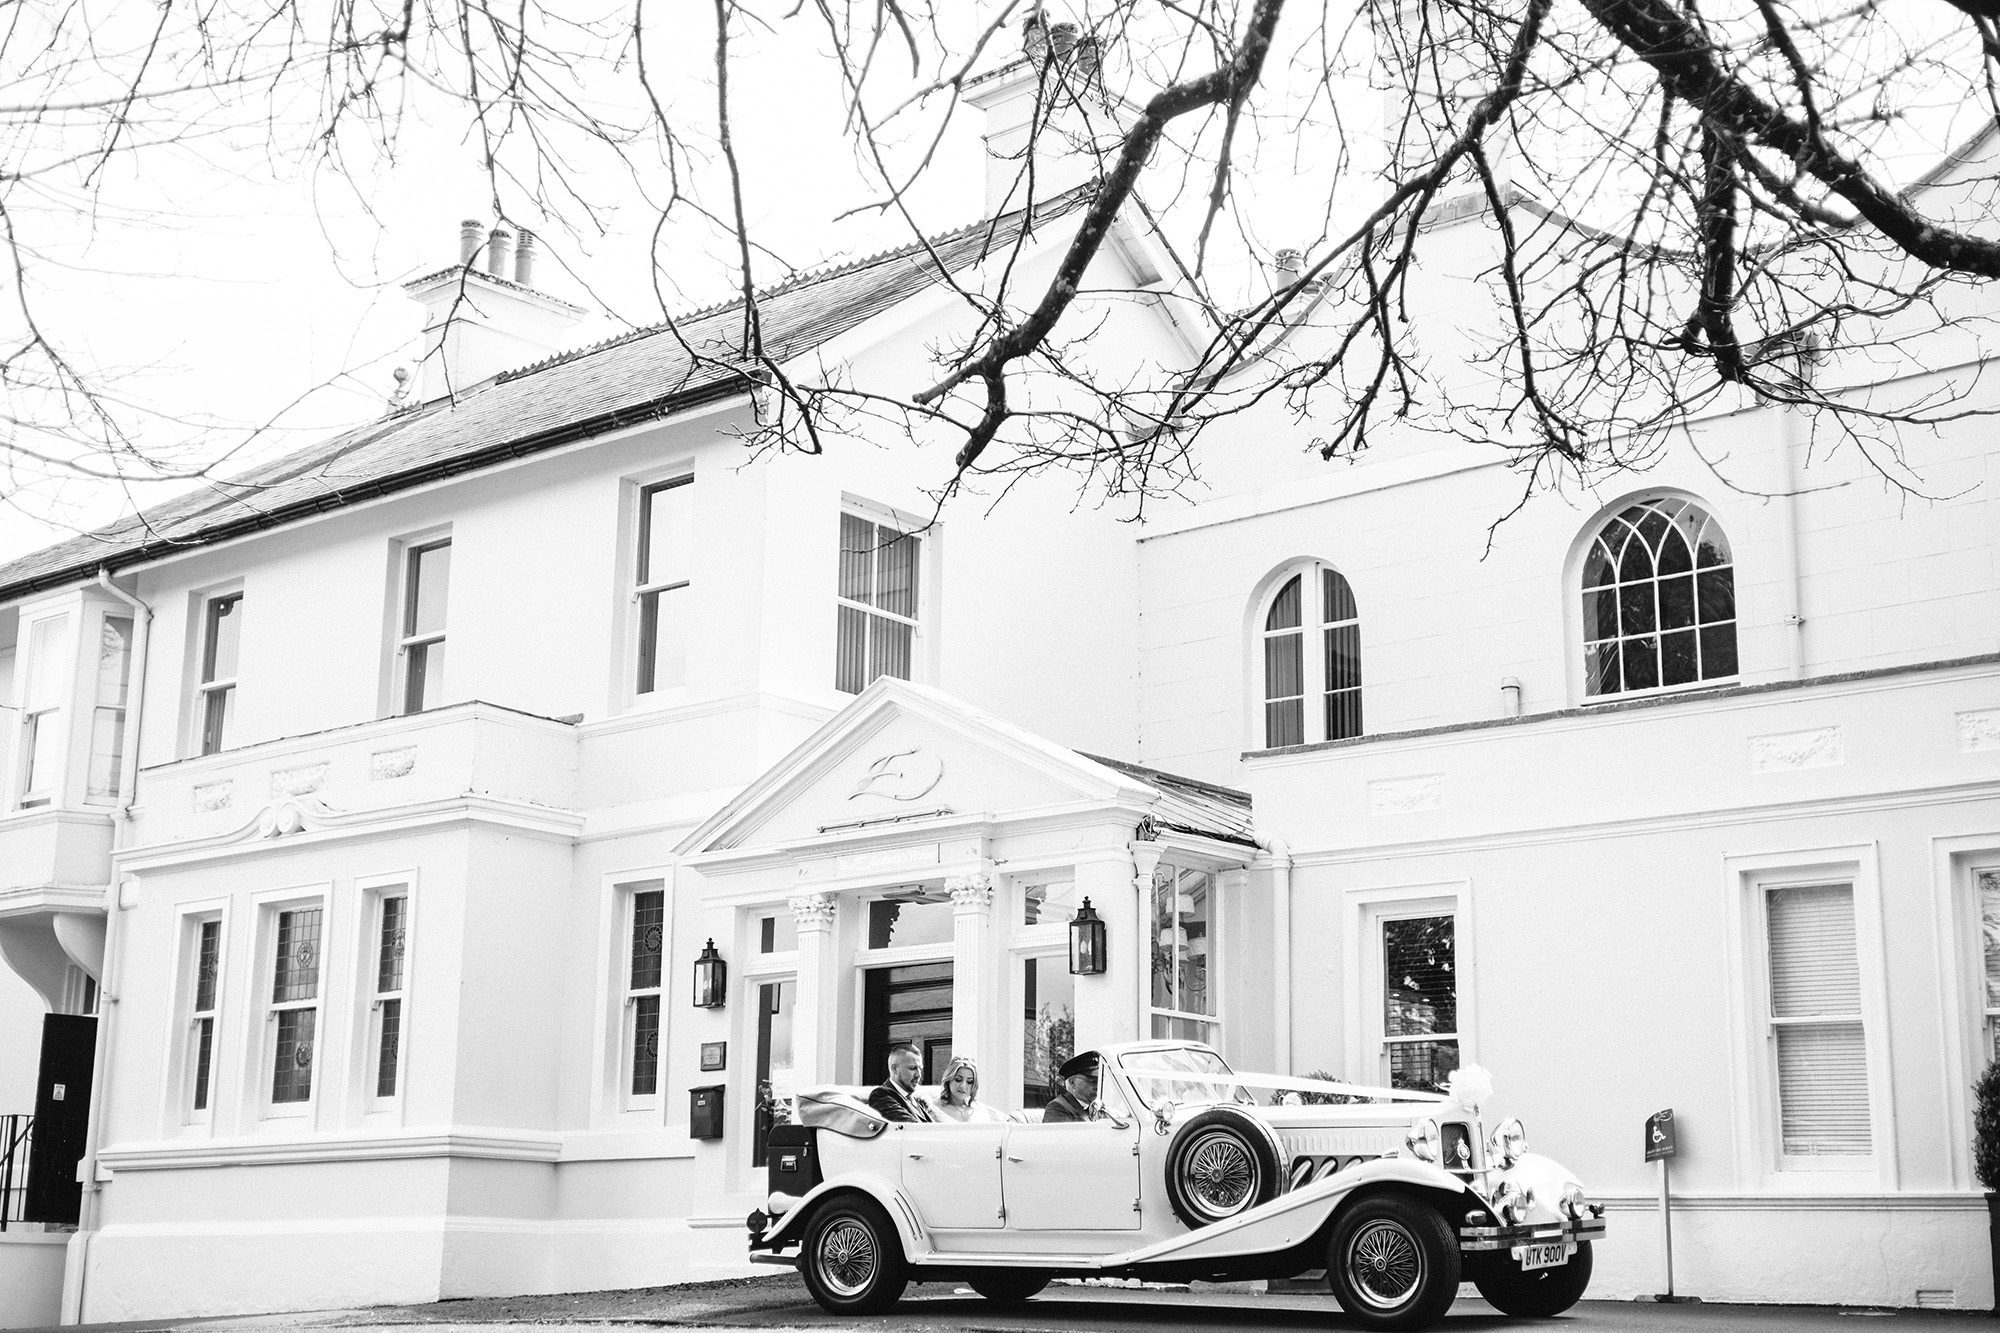 St Elizabeth's house Weddings by Younger